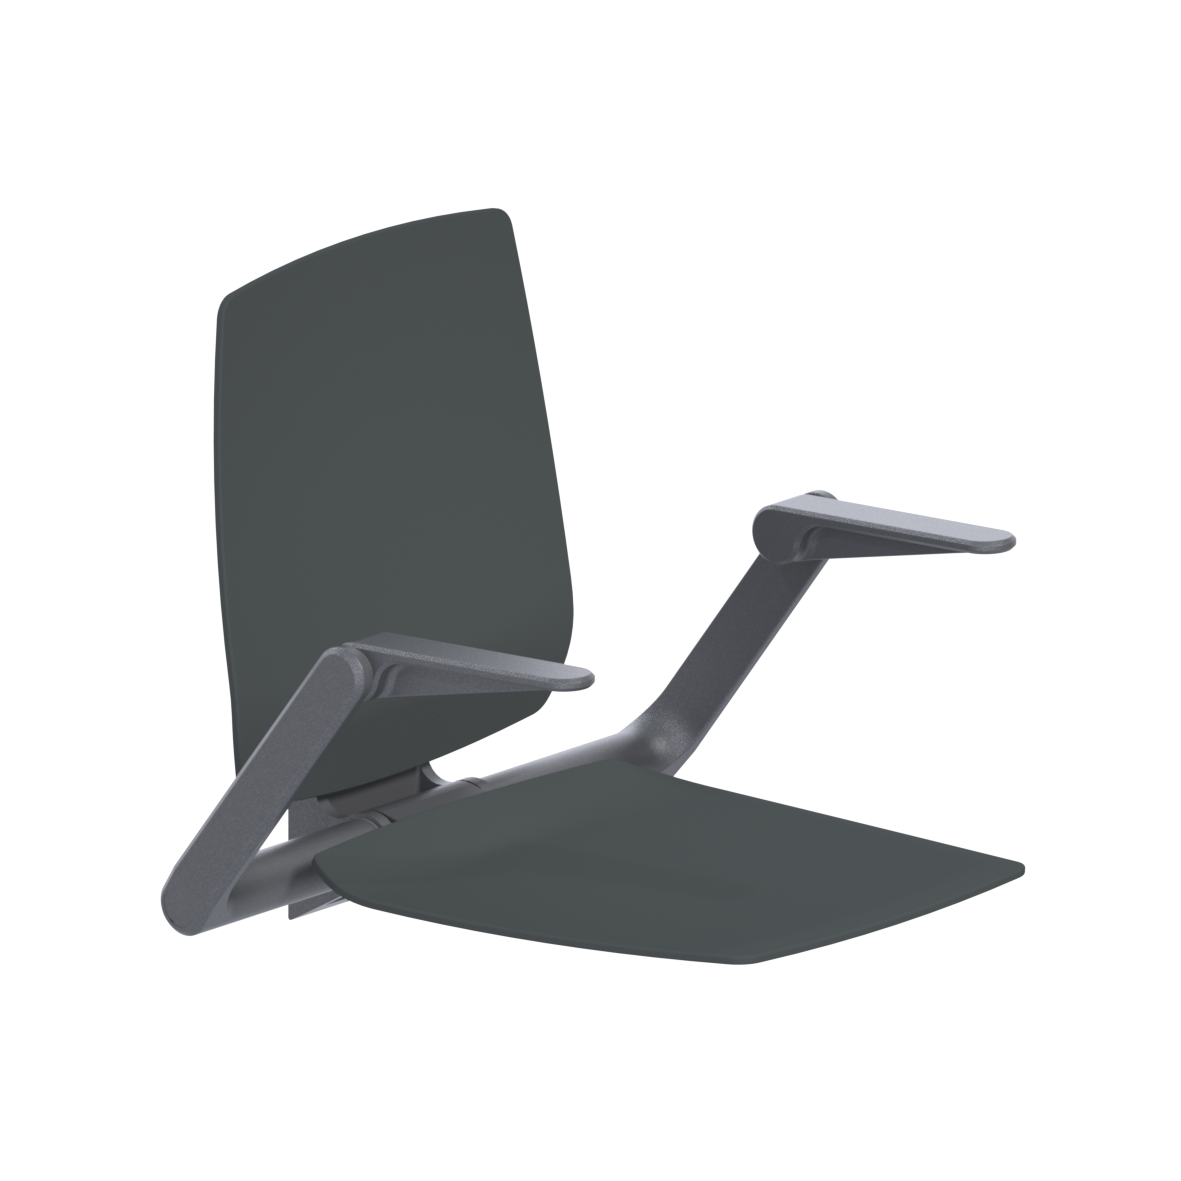 Ascento Lift-up shower seat vario, with backrest and armrests, 584 x 512 x 505 mm, Ascento Dark grey